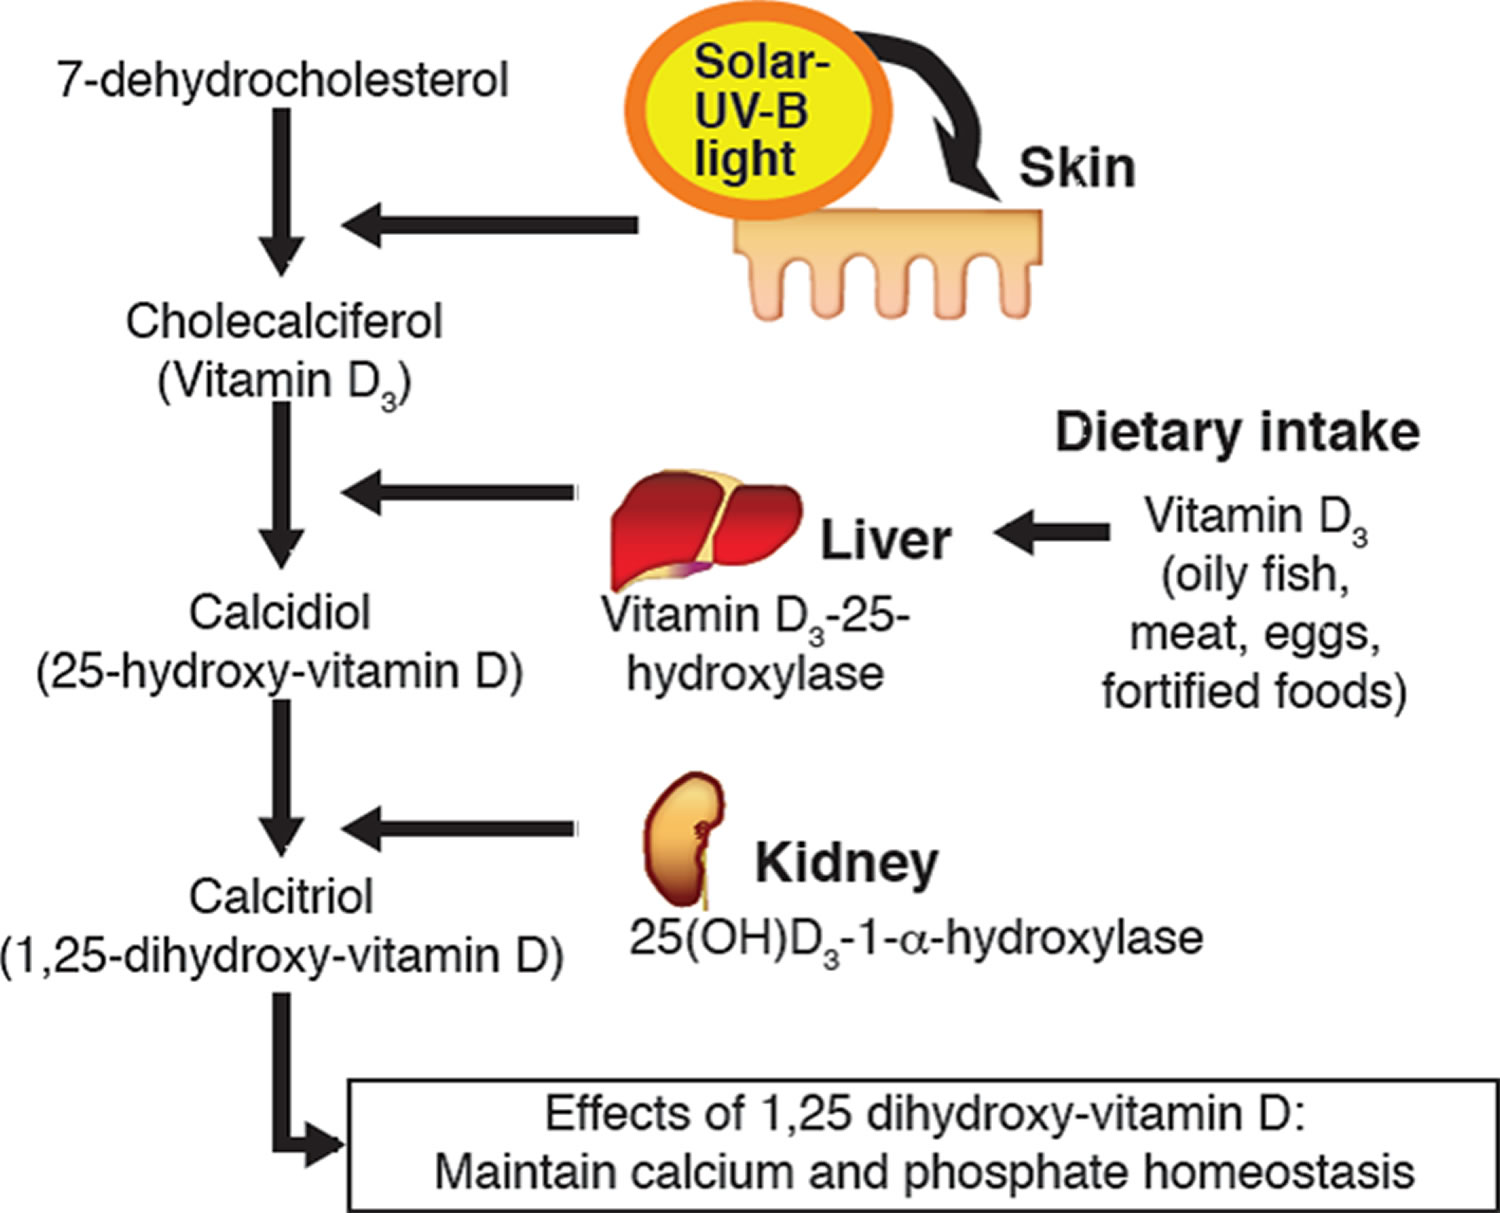 vitamin D production in the skin